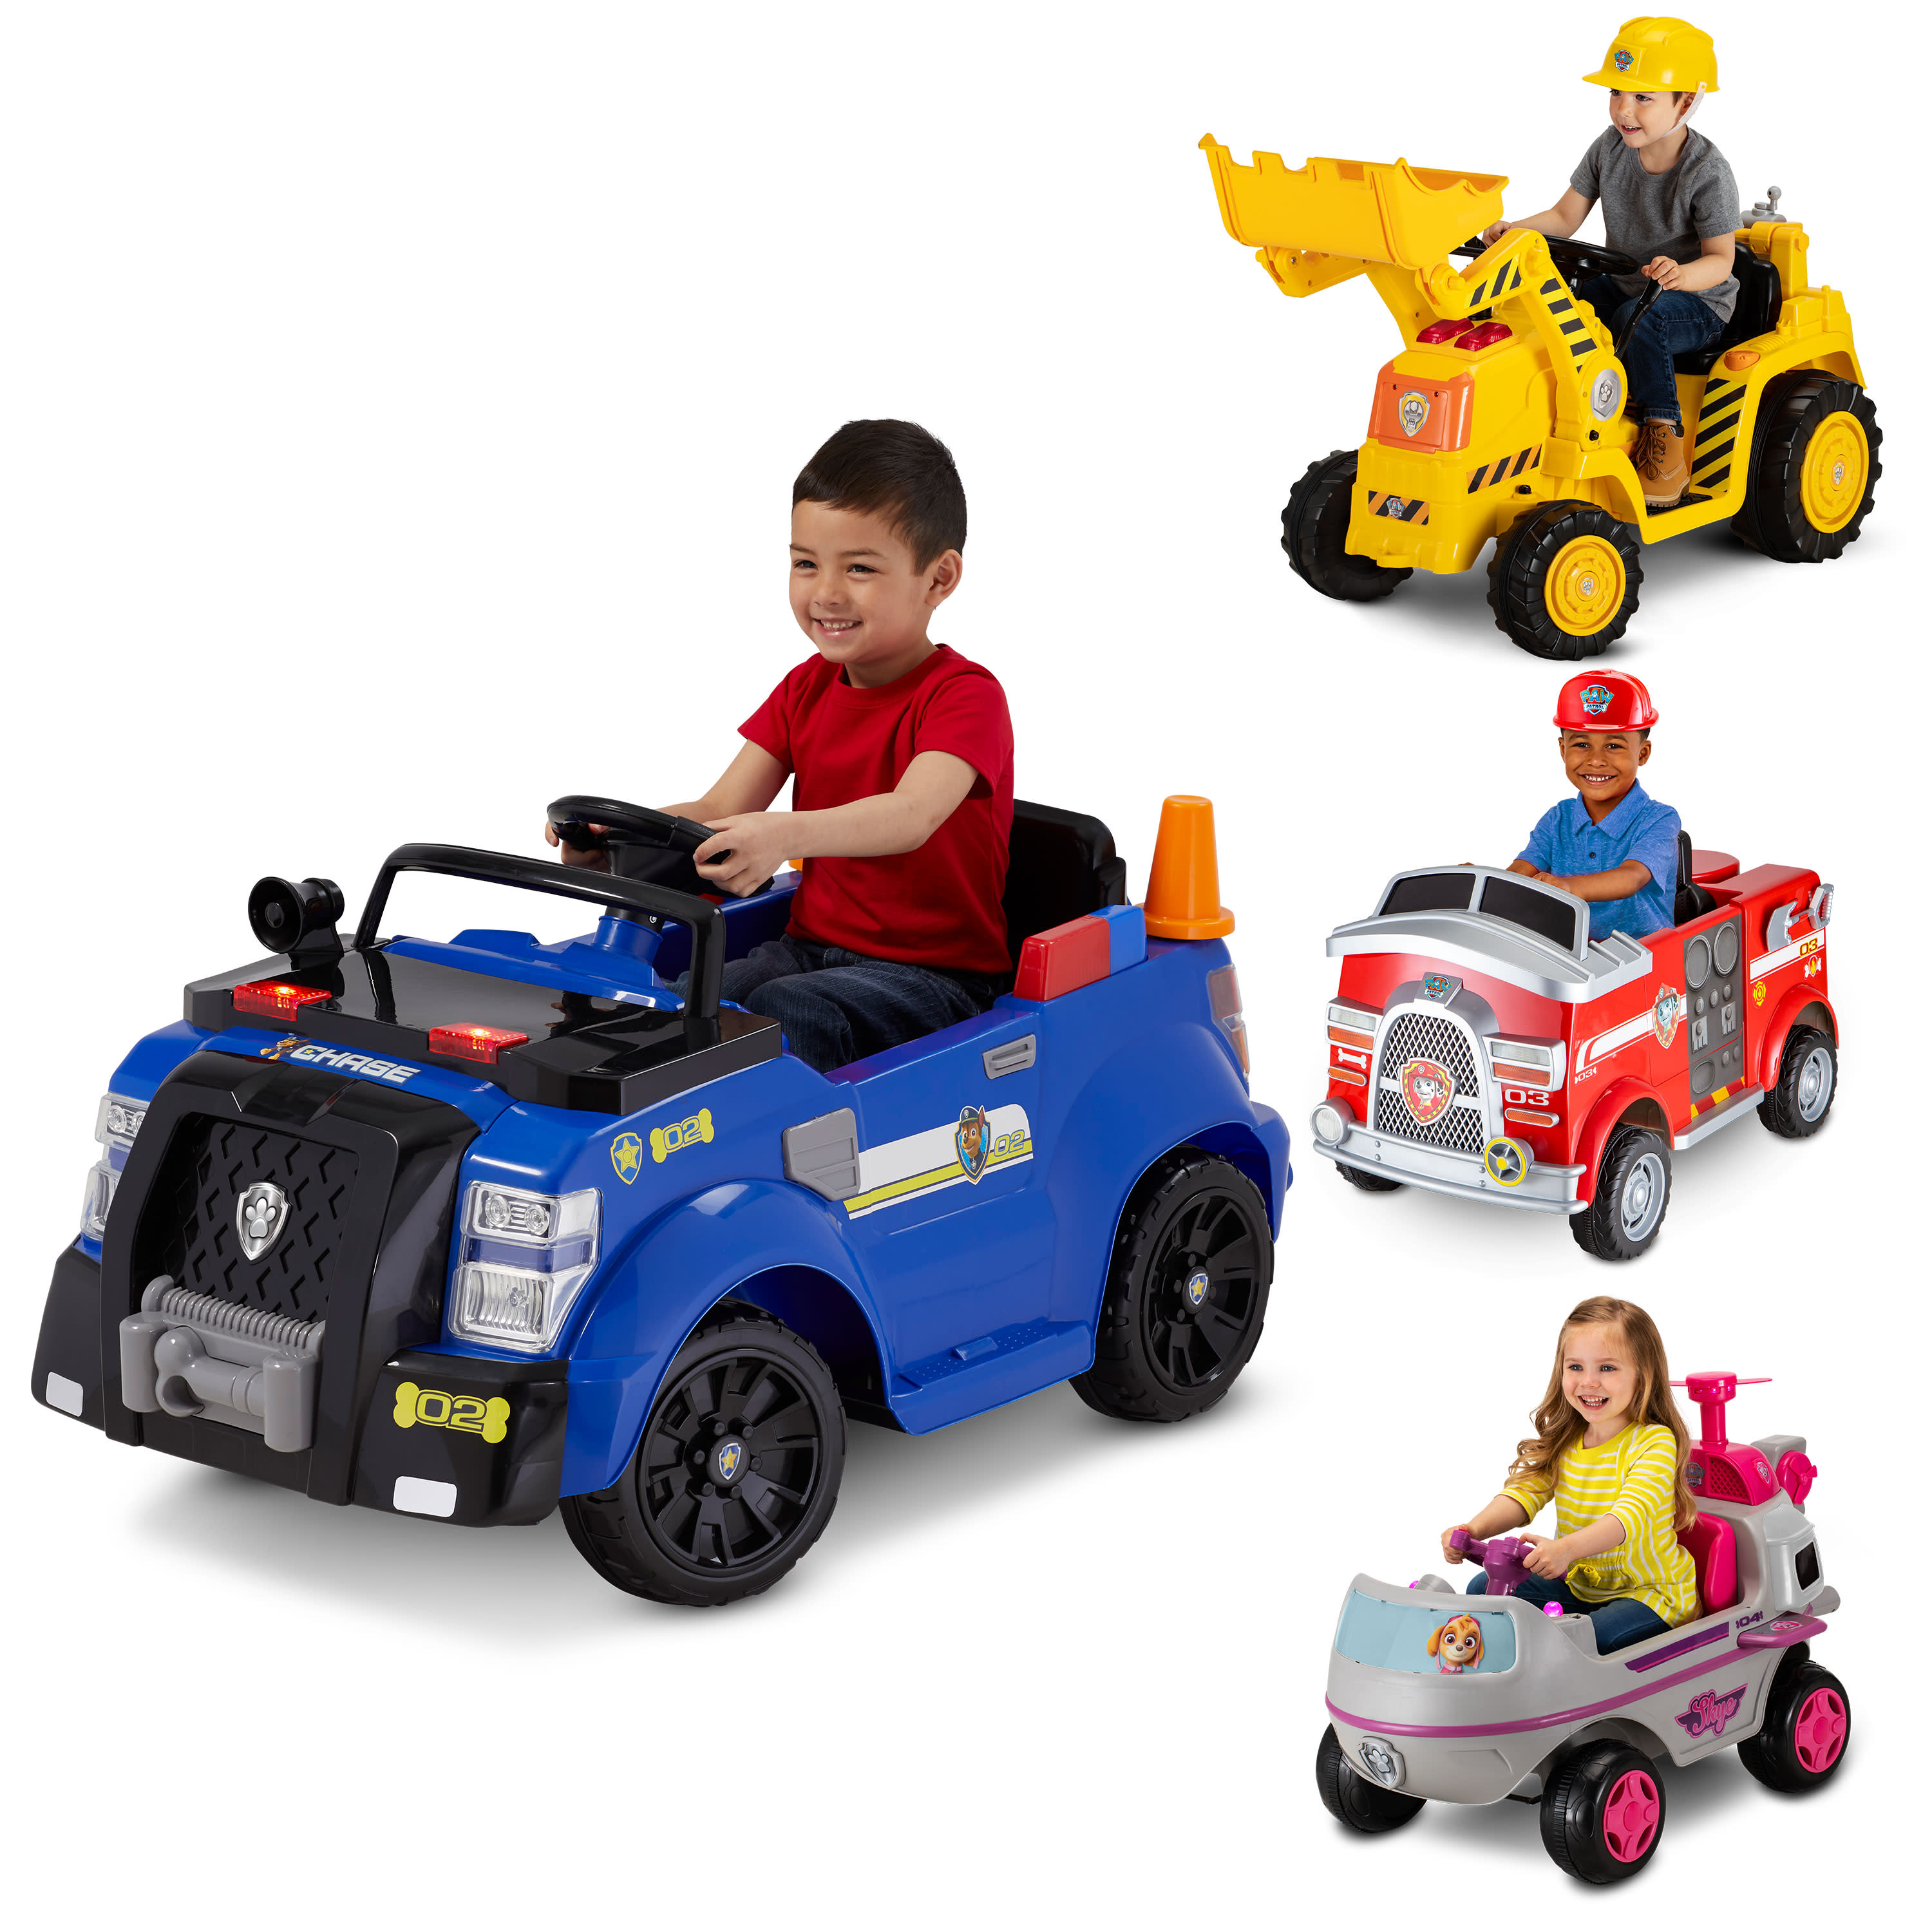 Nickelodeon's PAW Patrol: Chase Police Cruiser, 6-Volt Ride-On Toy by Kid Trax - image 1 of 9